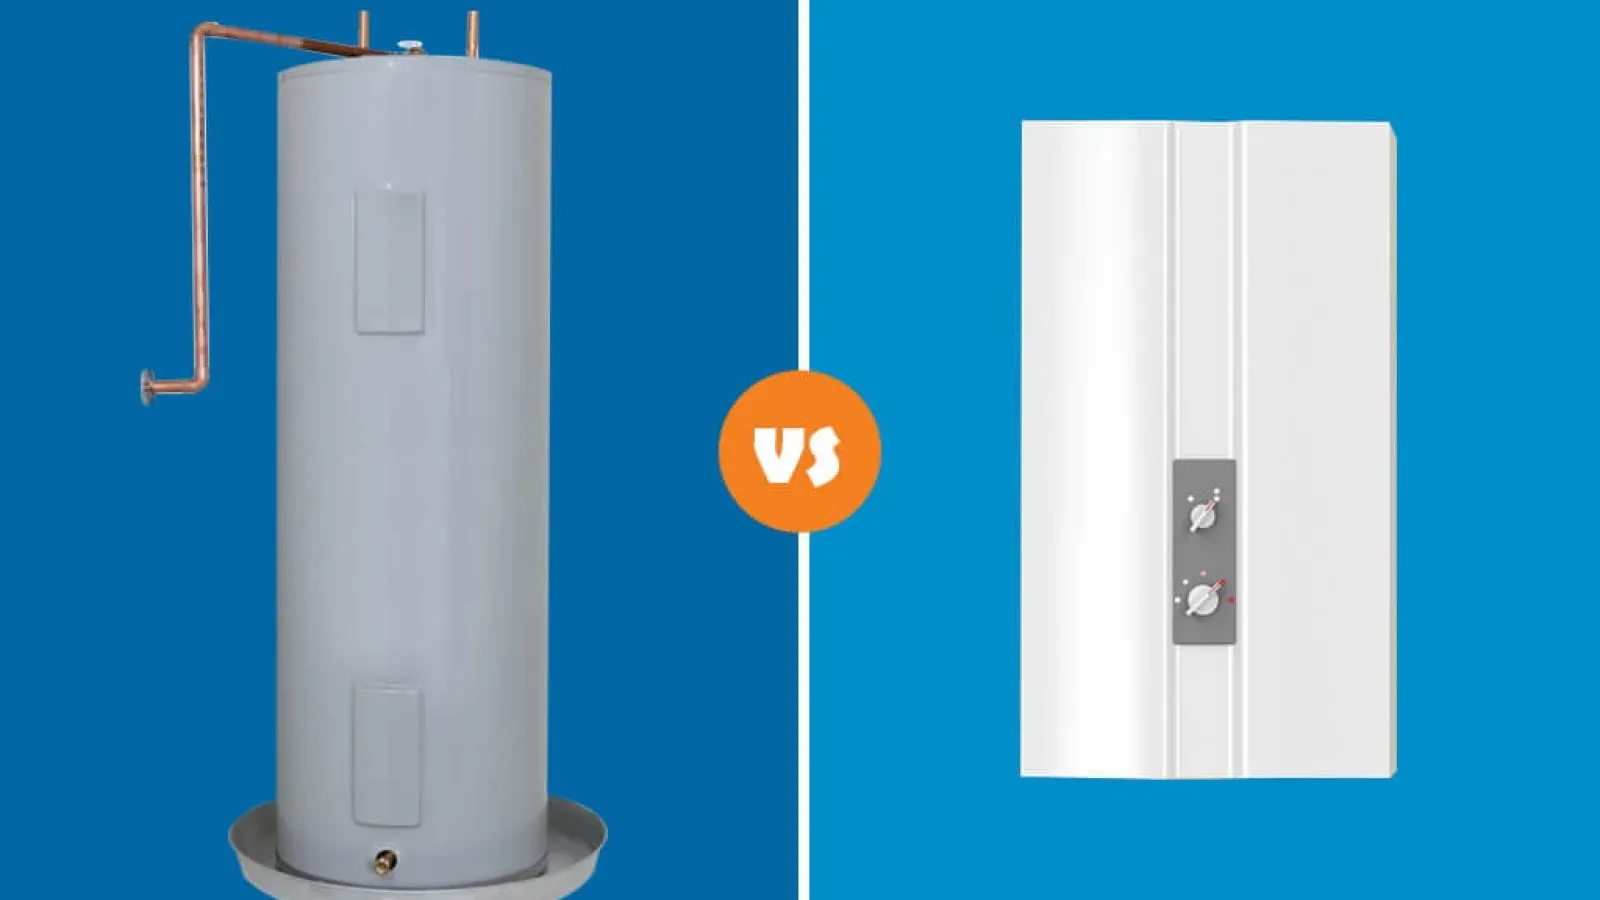 Tank Vs Tankless Water Heater – Which Is for You?